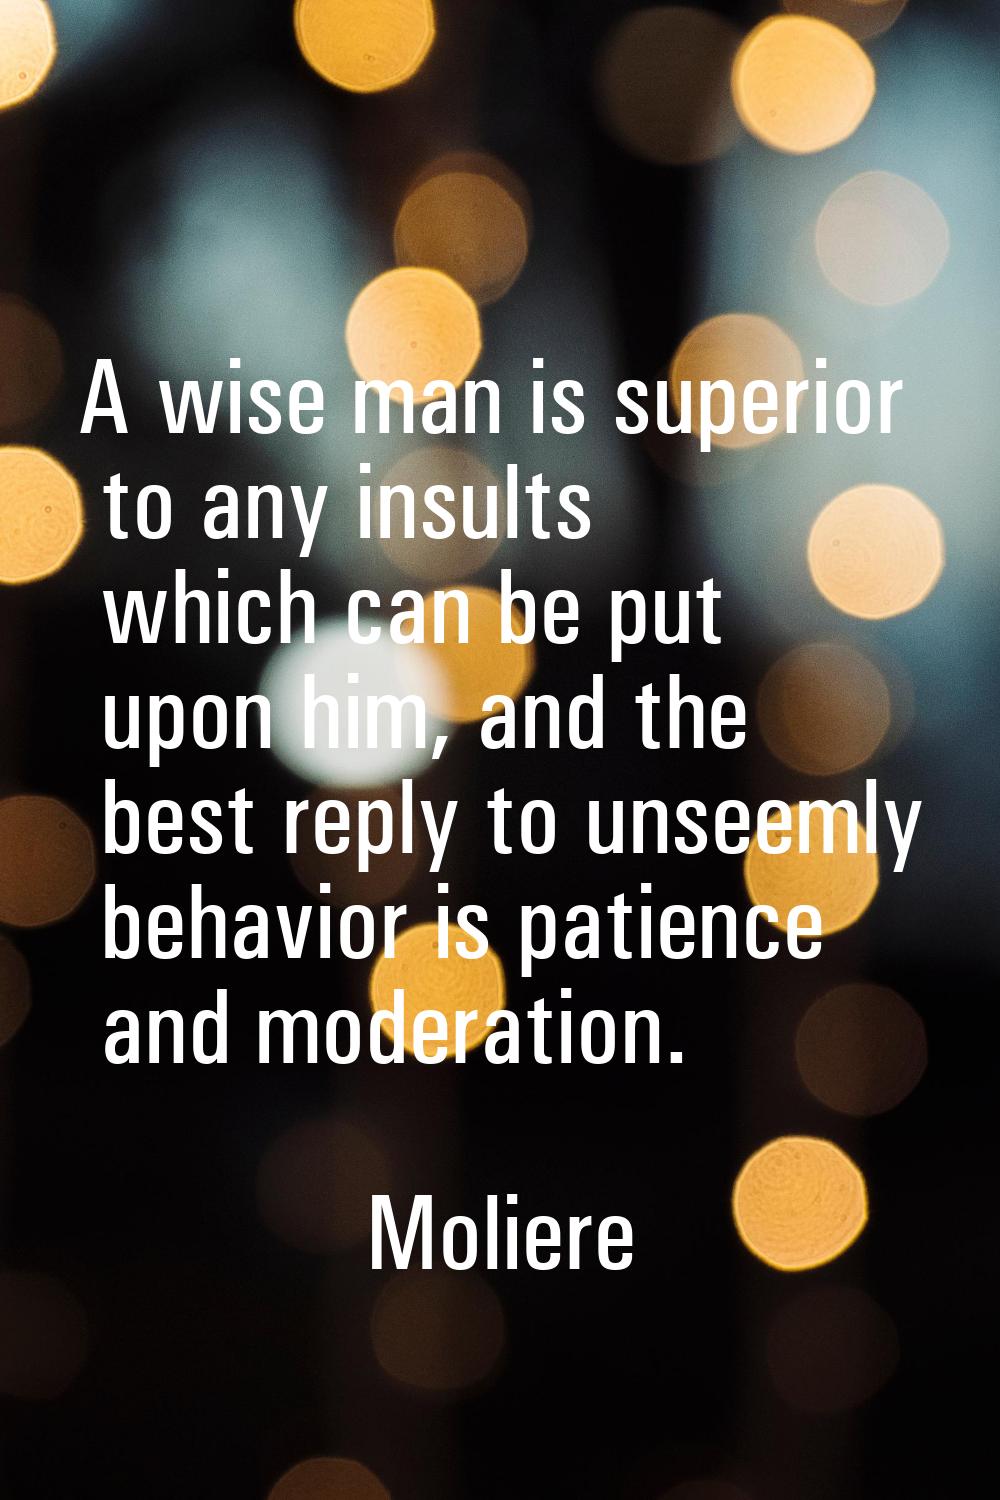 A wise man is superior to any insults which can be put upon him, and the best reply to unseemly beh